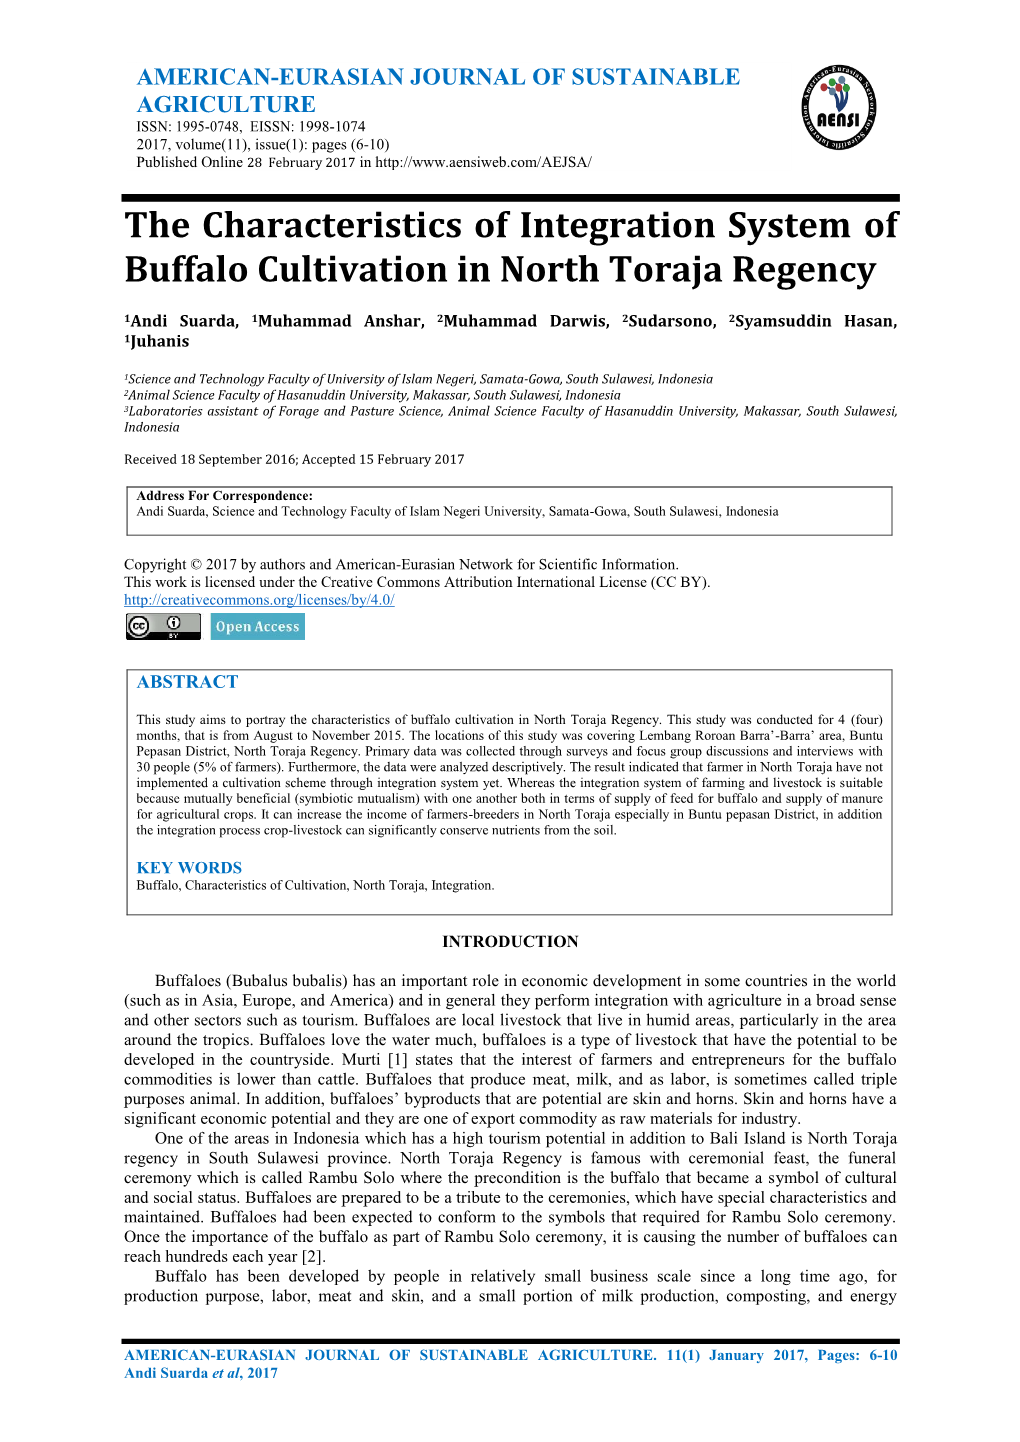 The Characteristics of Integration System of Buffalo Cultivation In